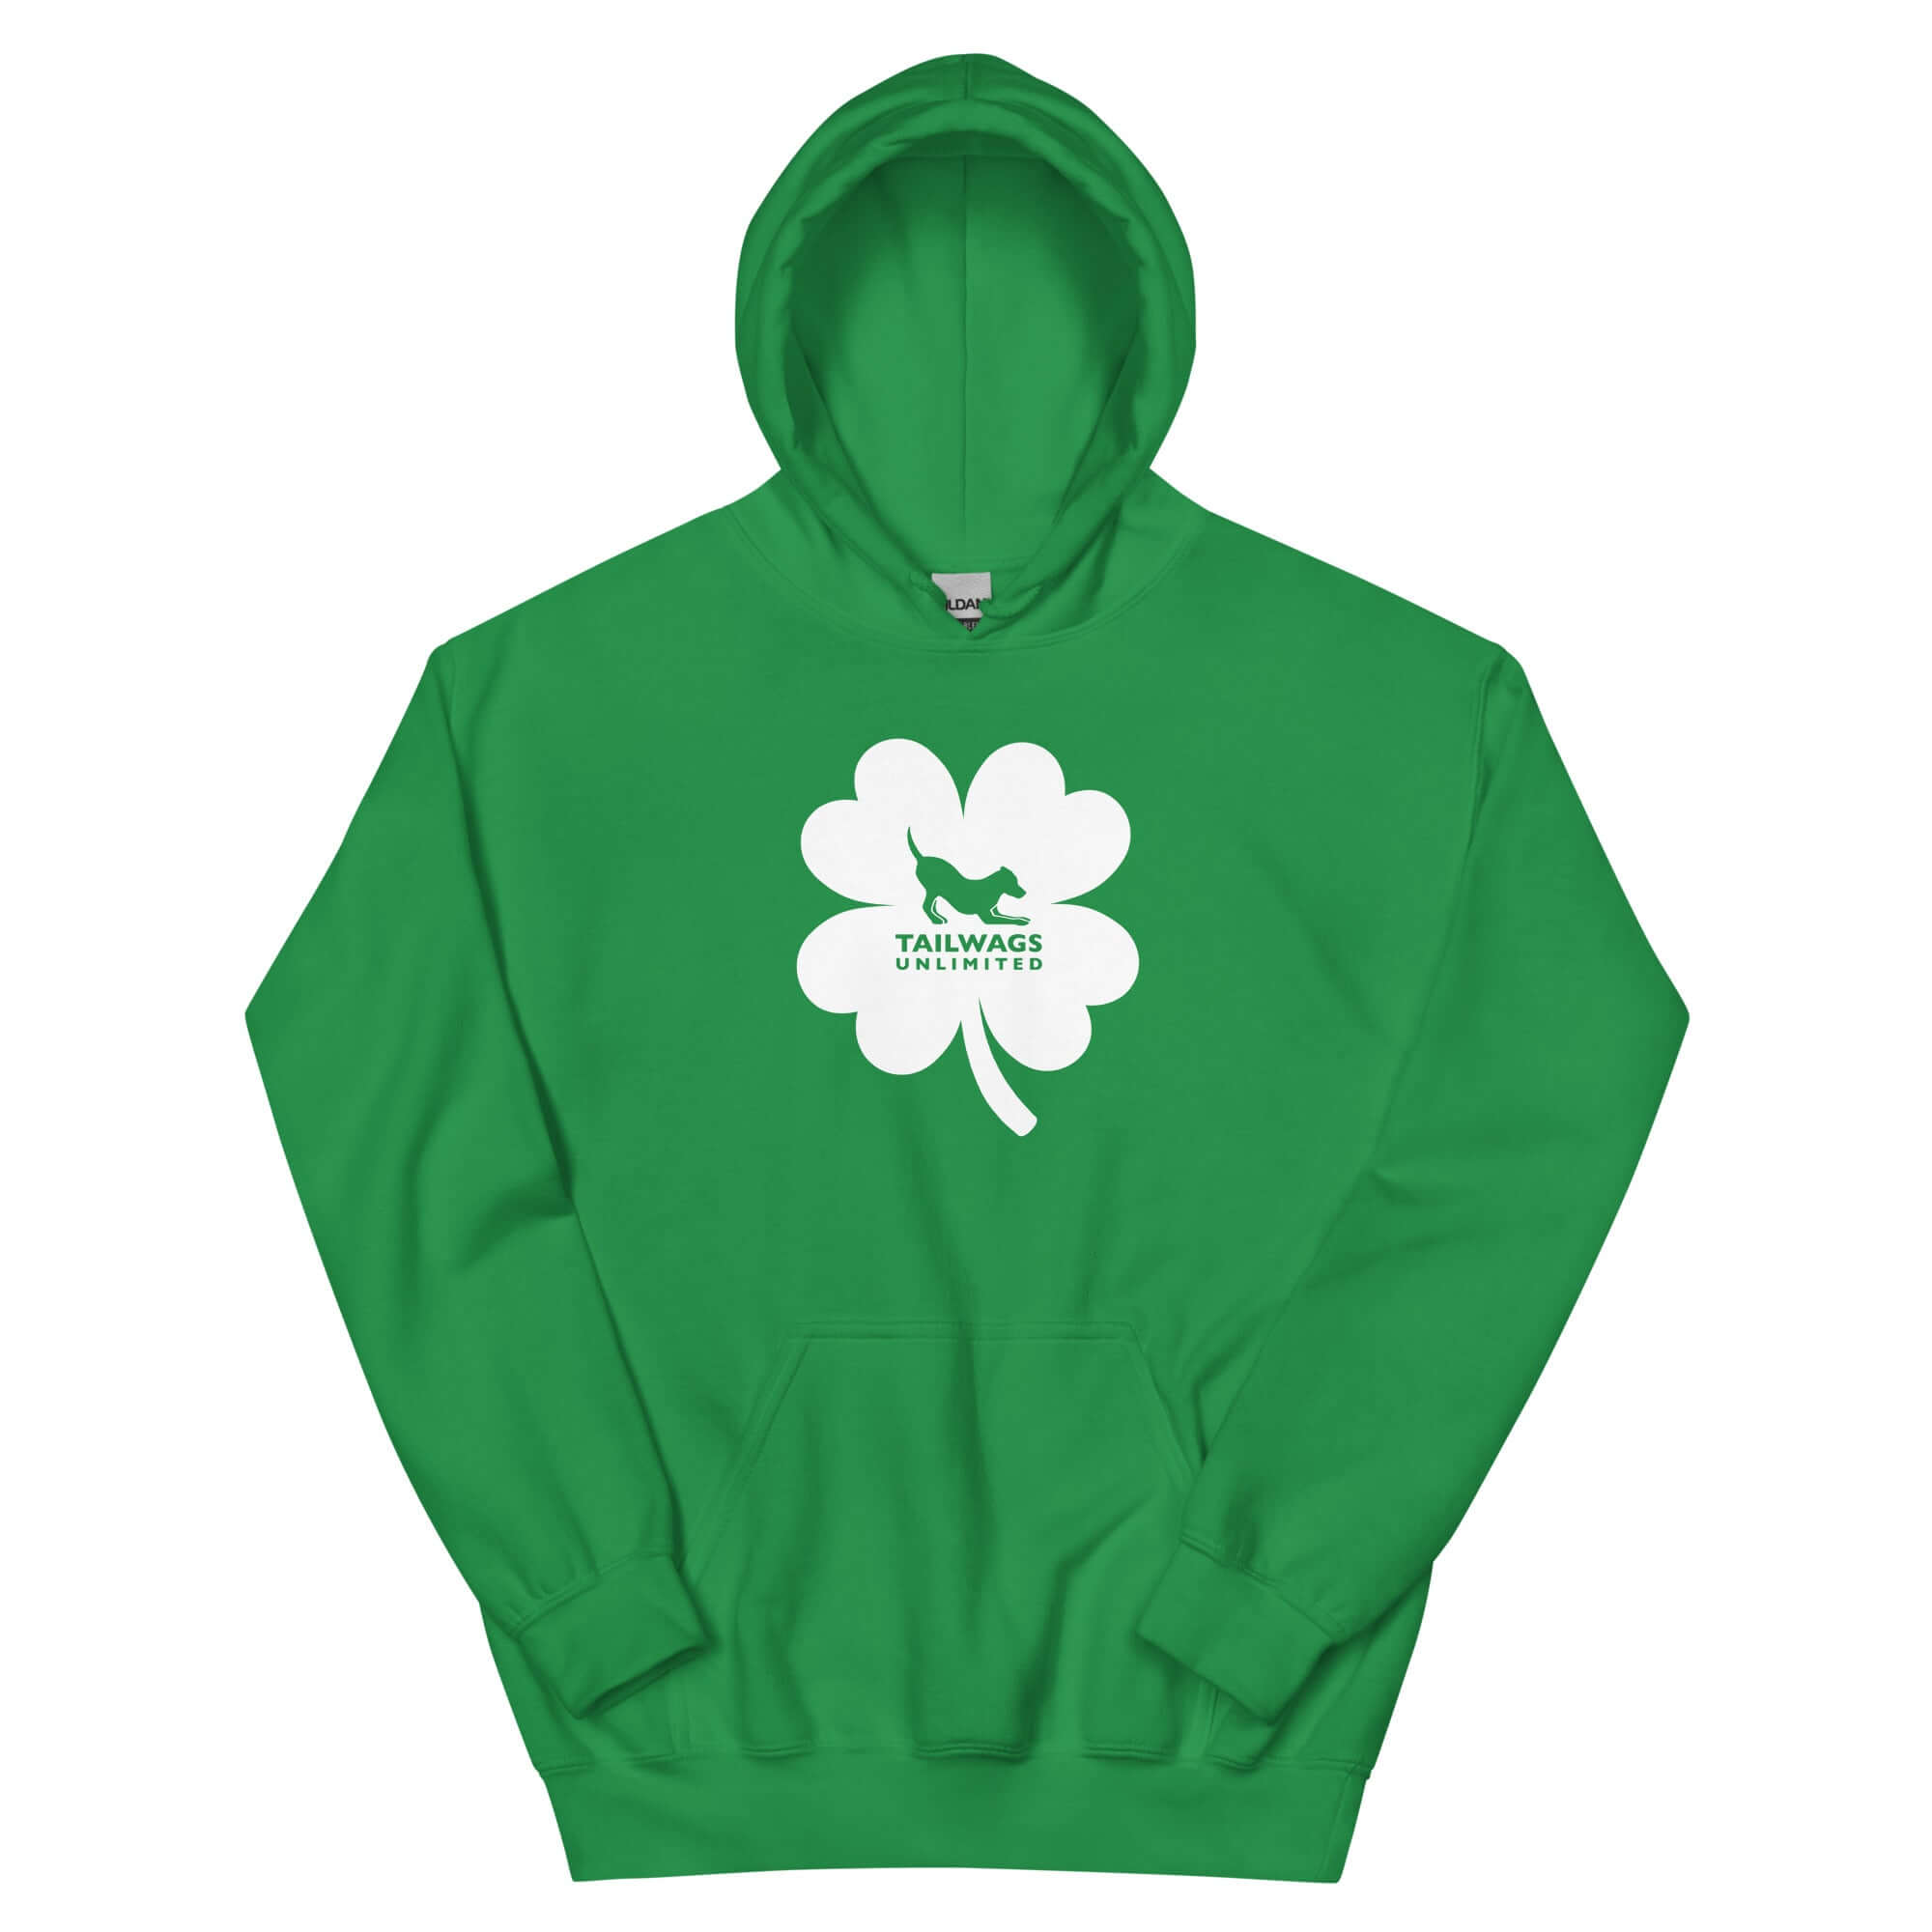 White Four Leaf Clover Logo Hoodie - TAILWAGS UNLIMITED